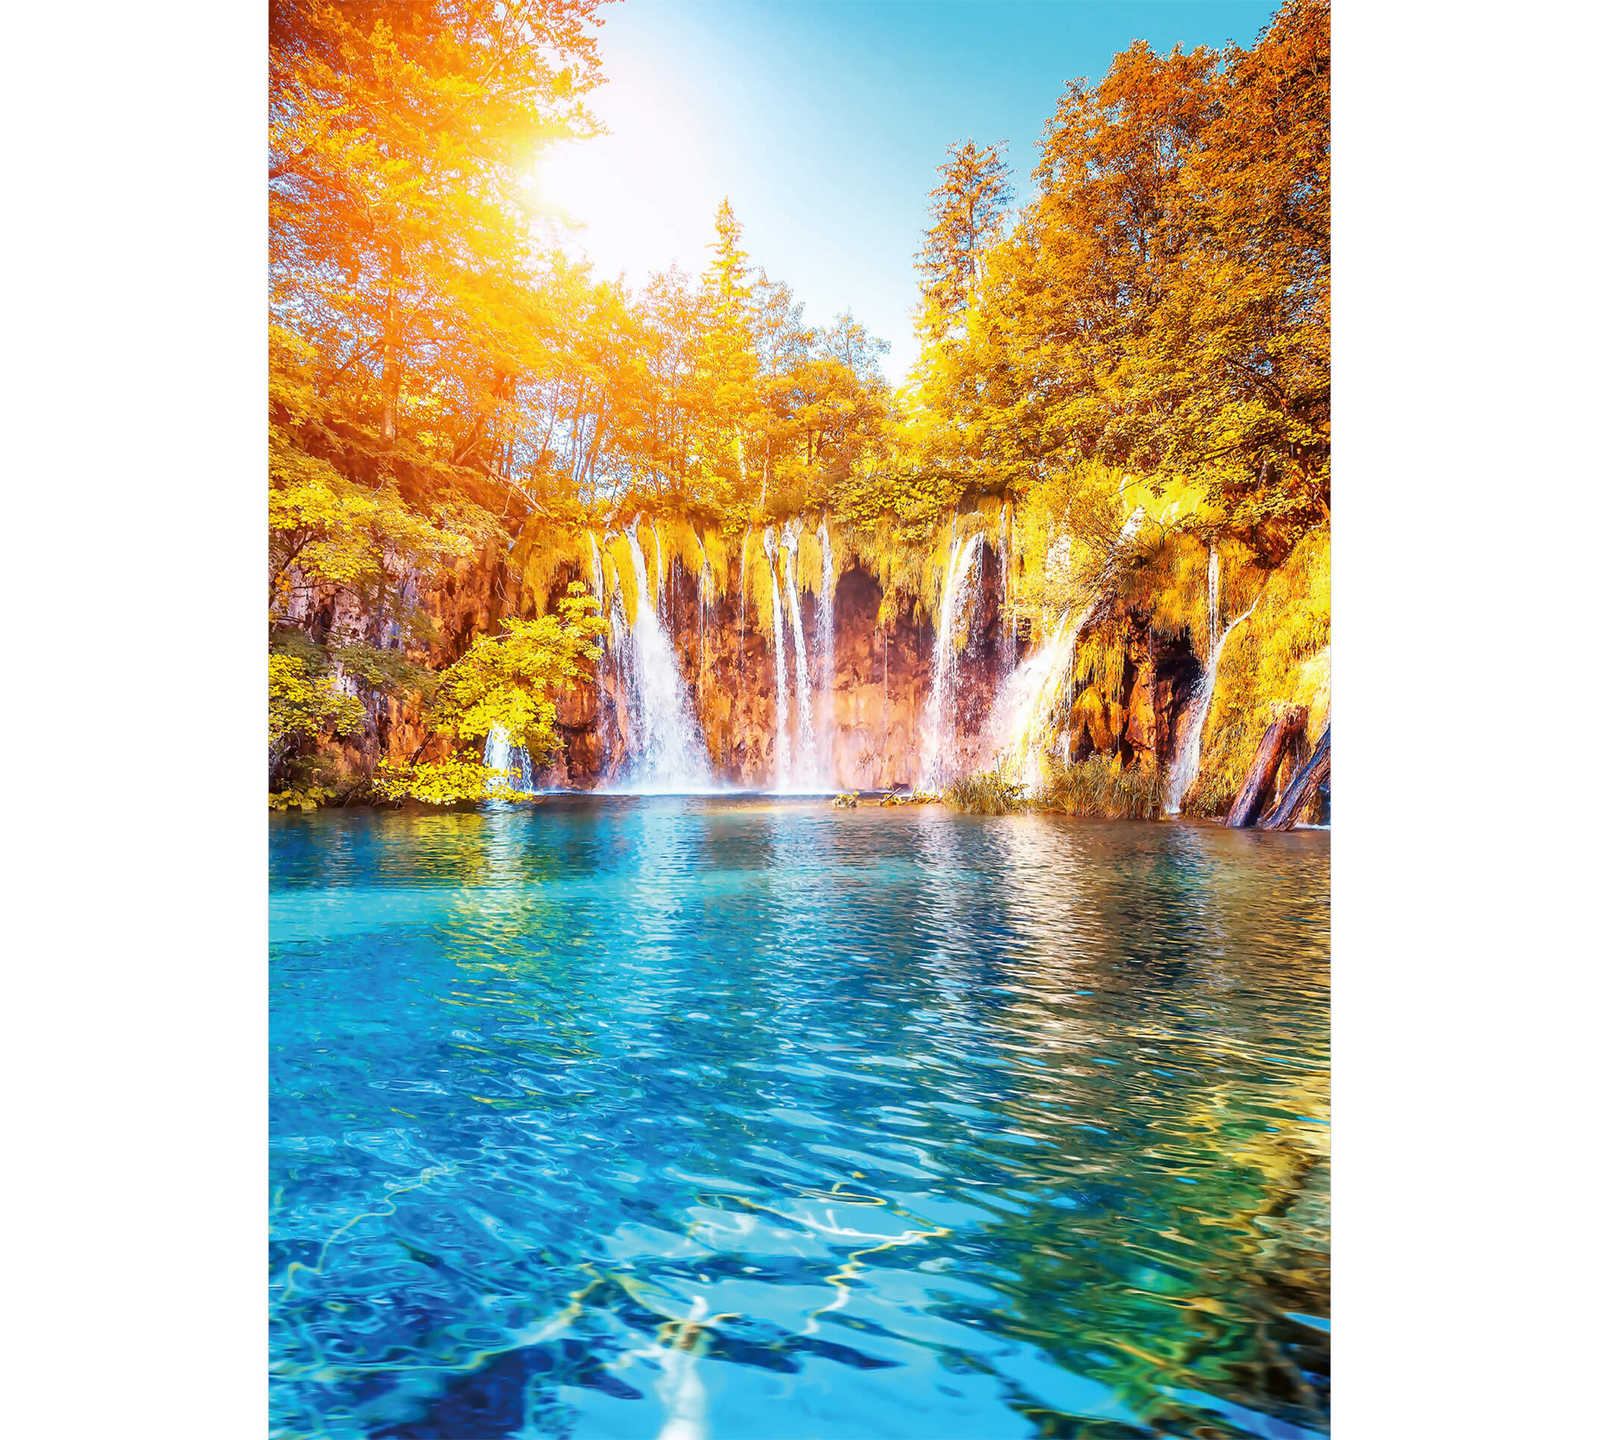         Waterfall mural with lake and forest landscape
    